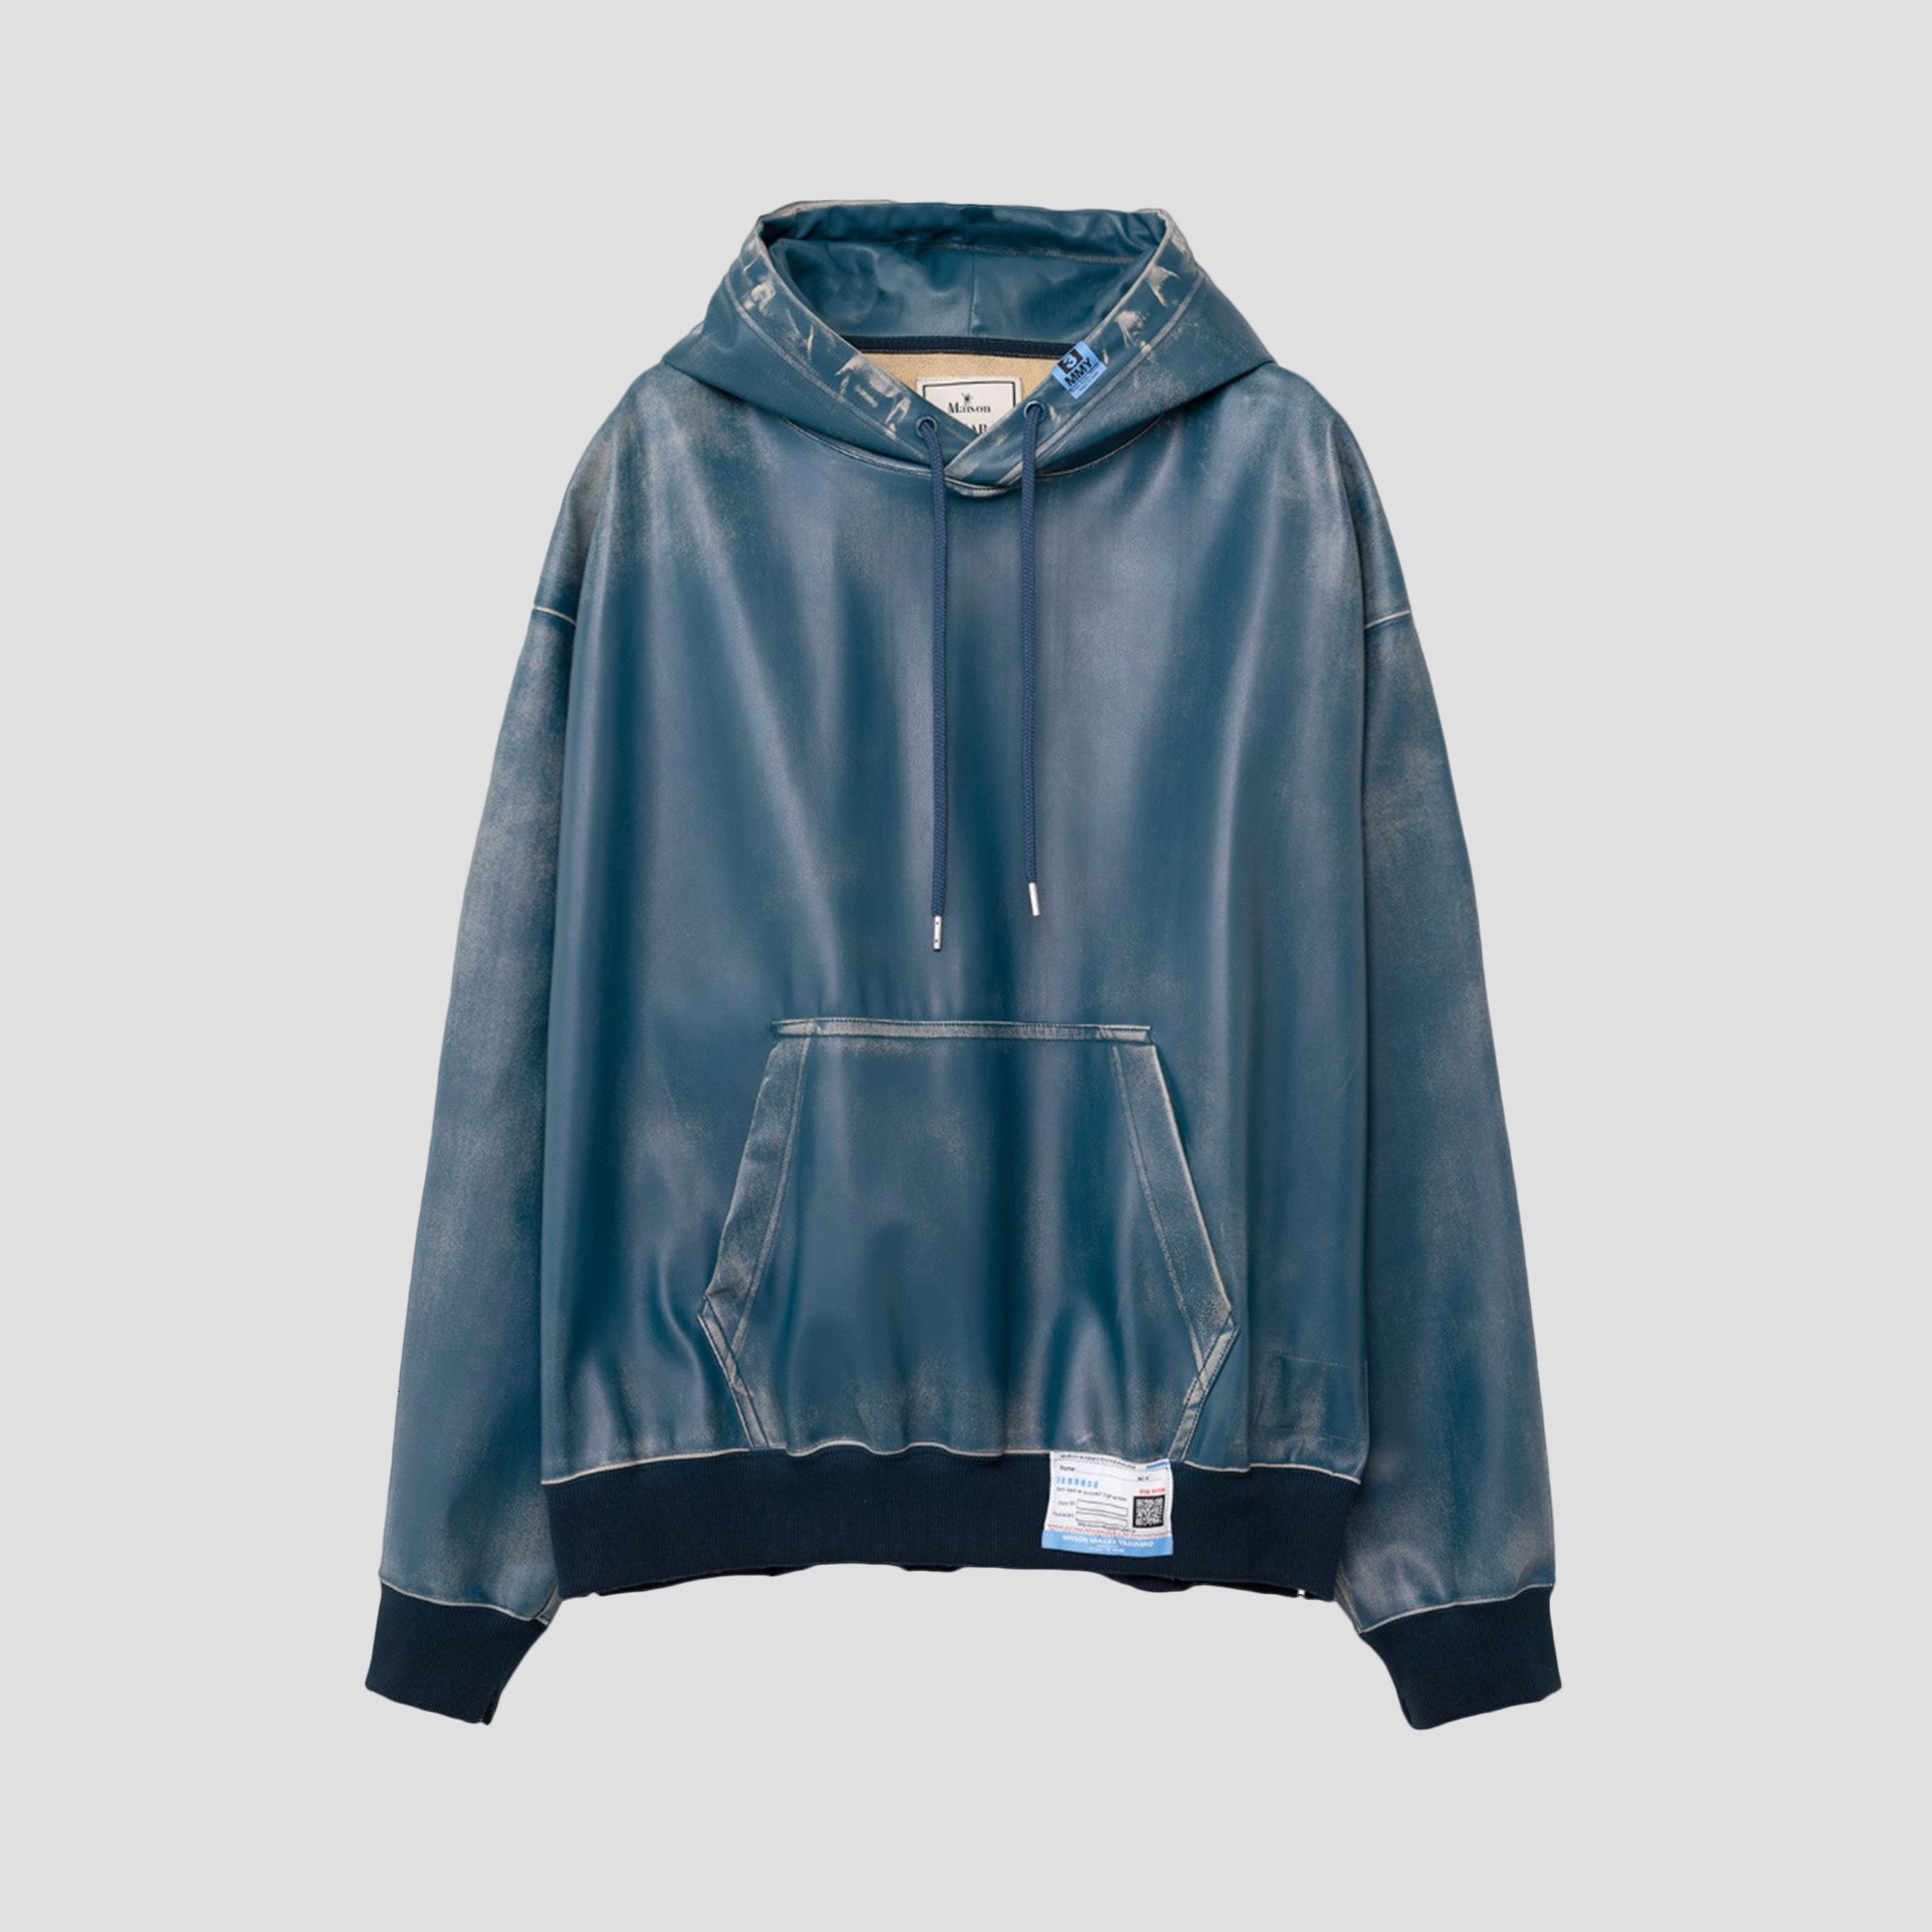 SYNTHETIC LEATHER HOODIE